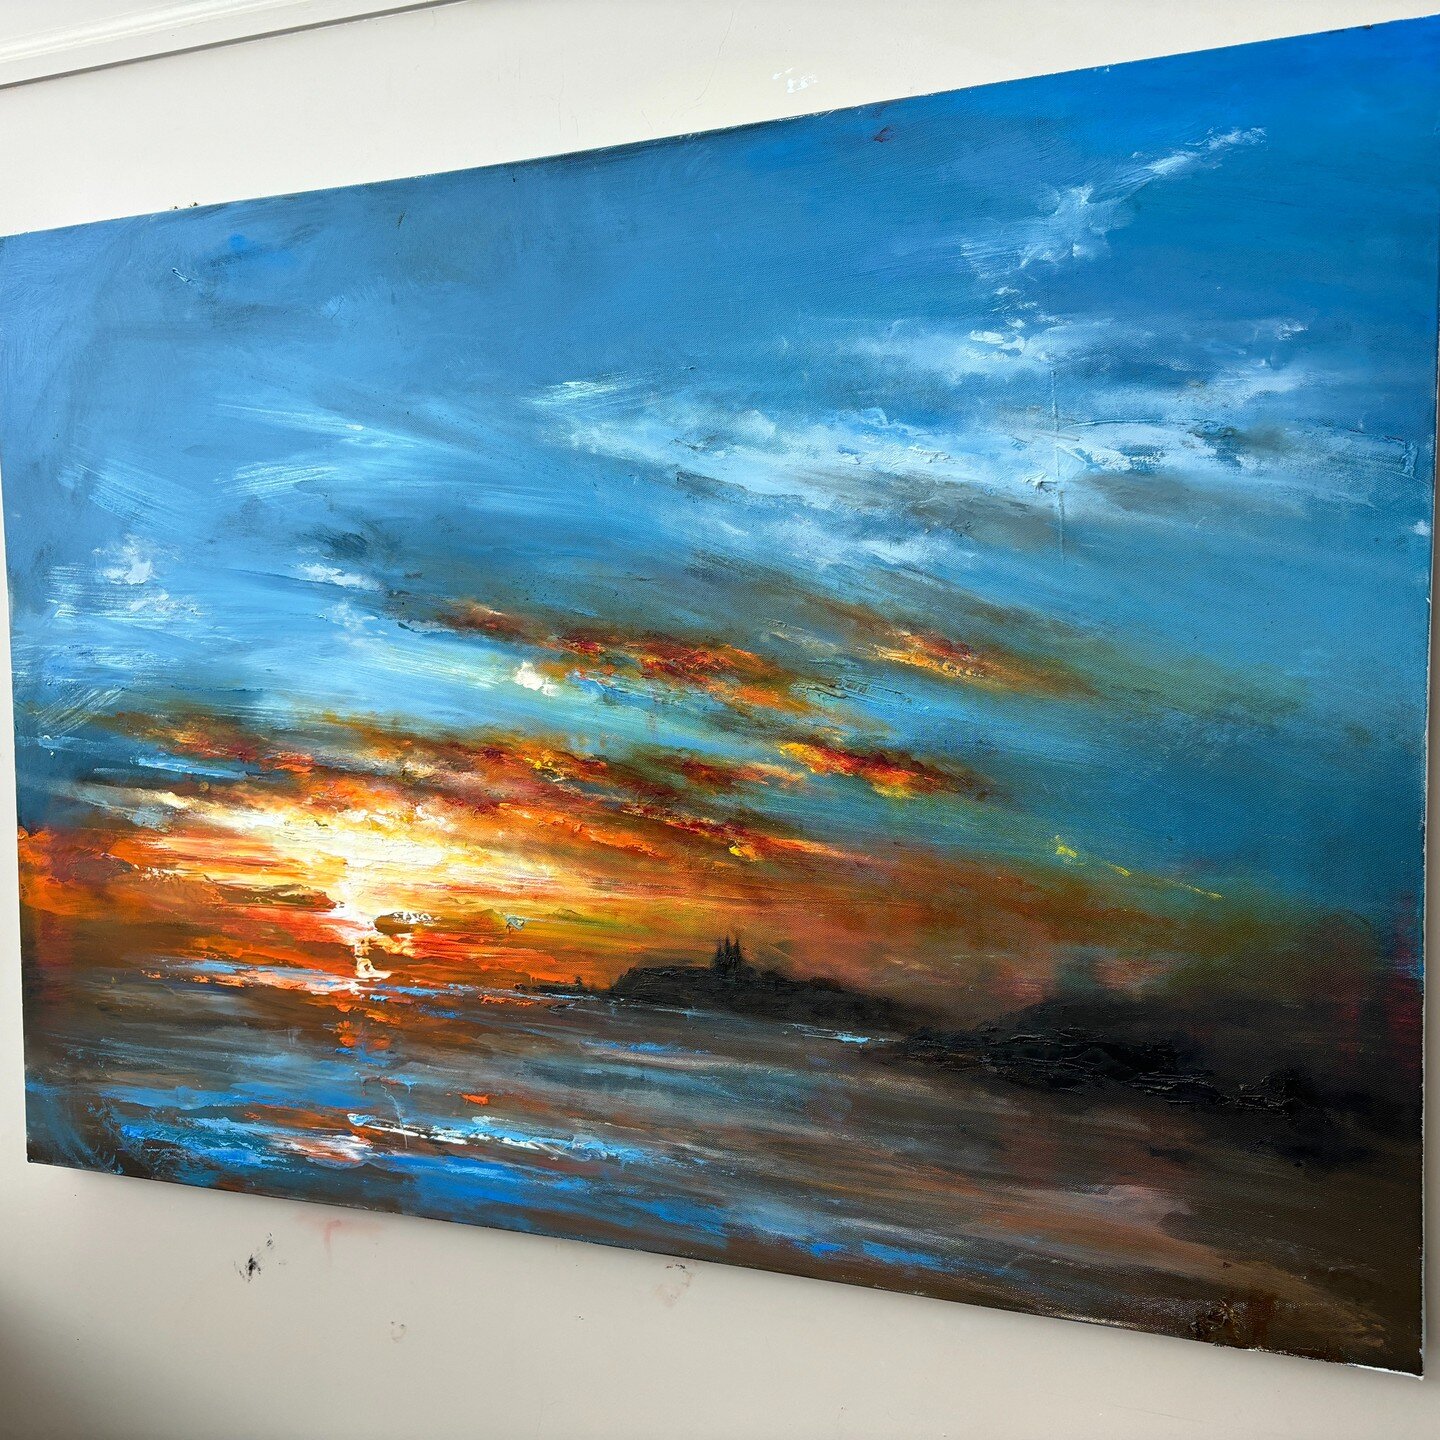 A new piece from Ady is now available. Celebrating the arrival of spring 'Spring Sunrise over Whitby'

Link to purchase in bio.